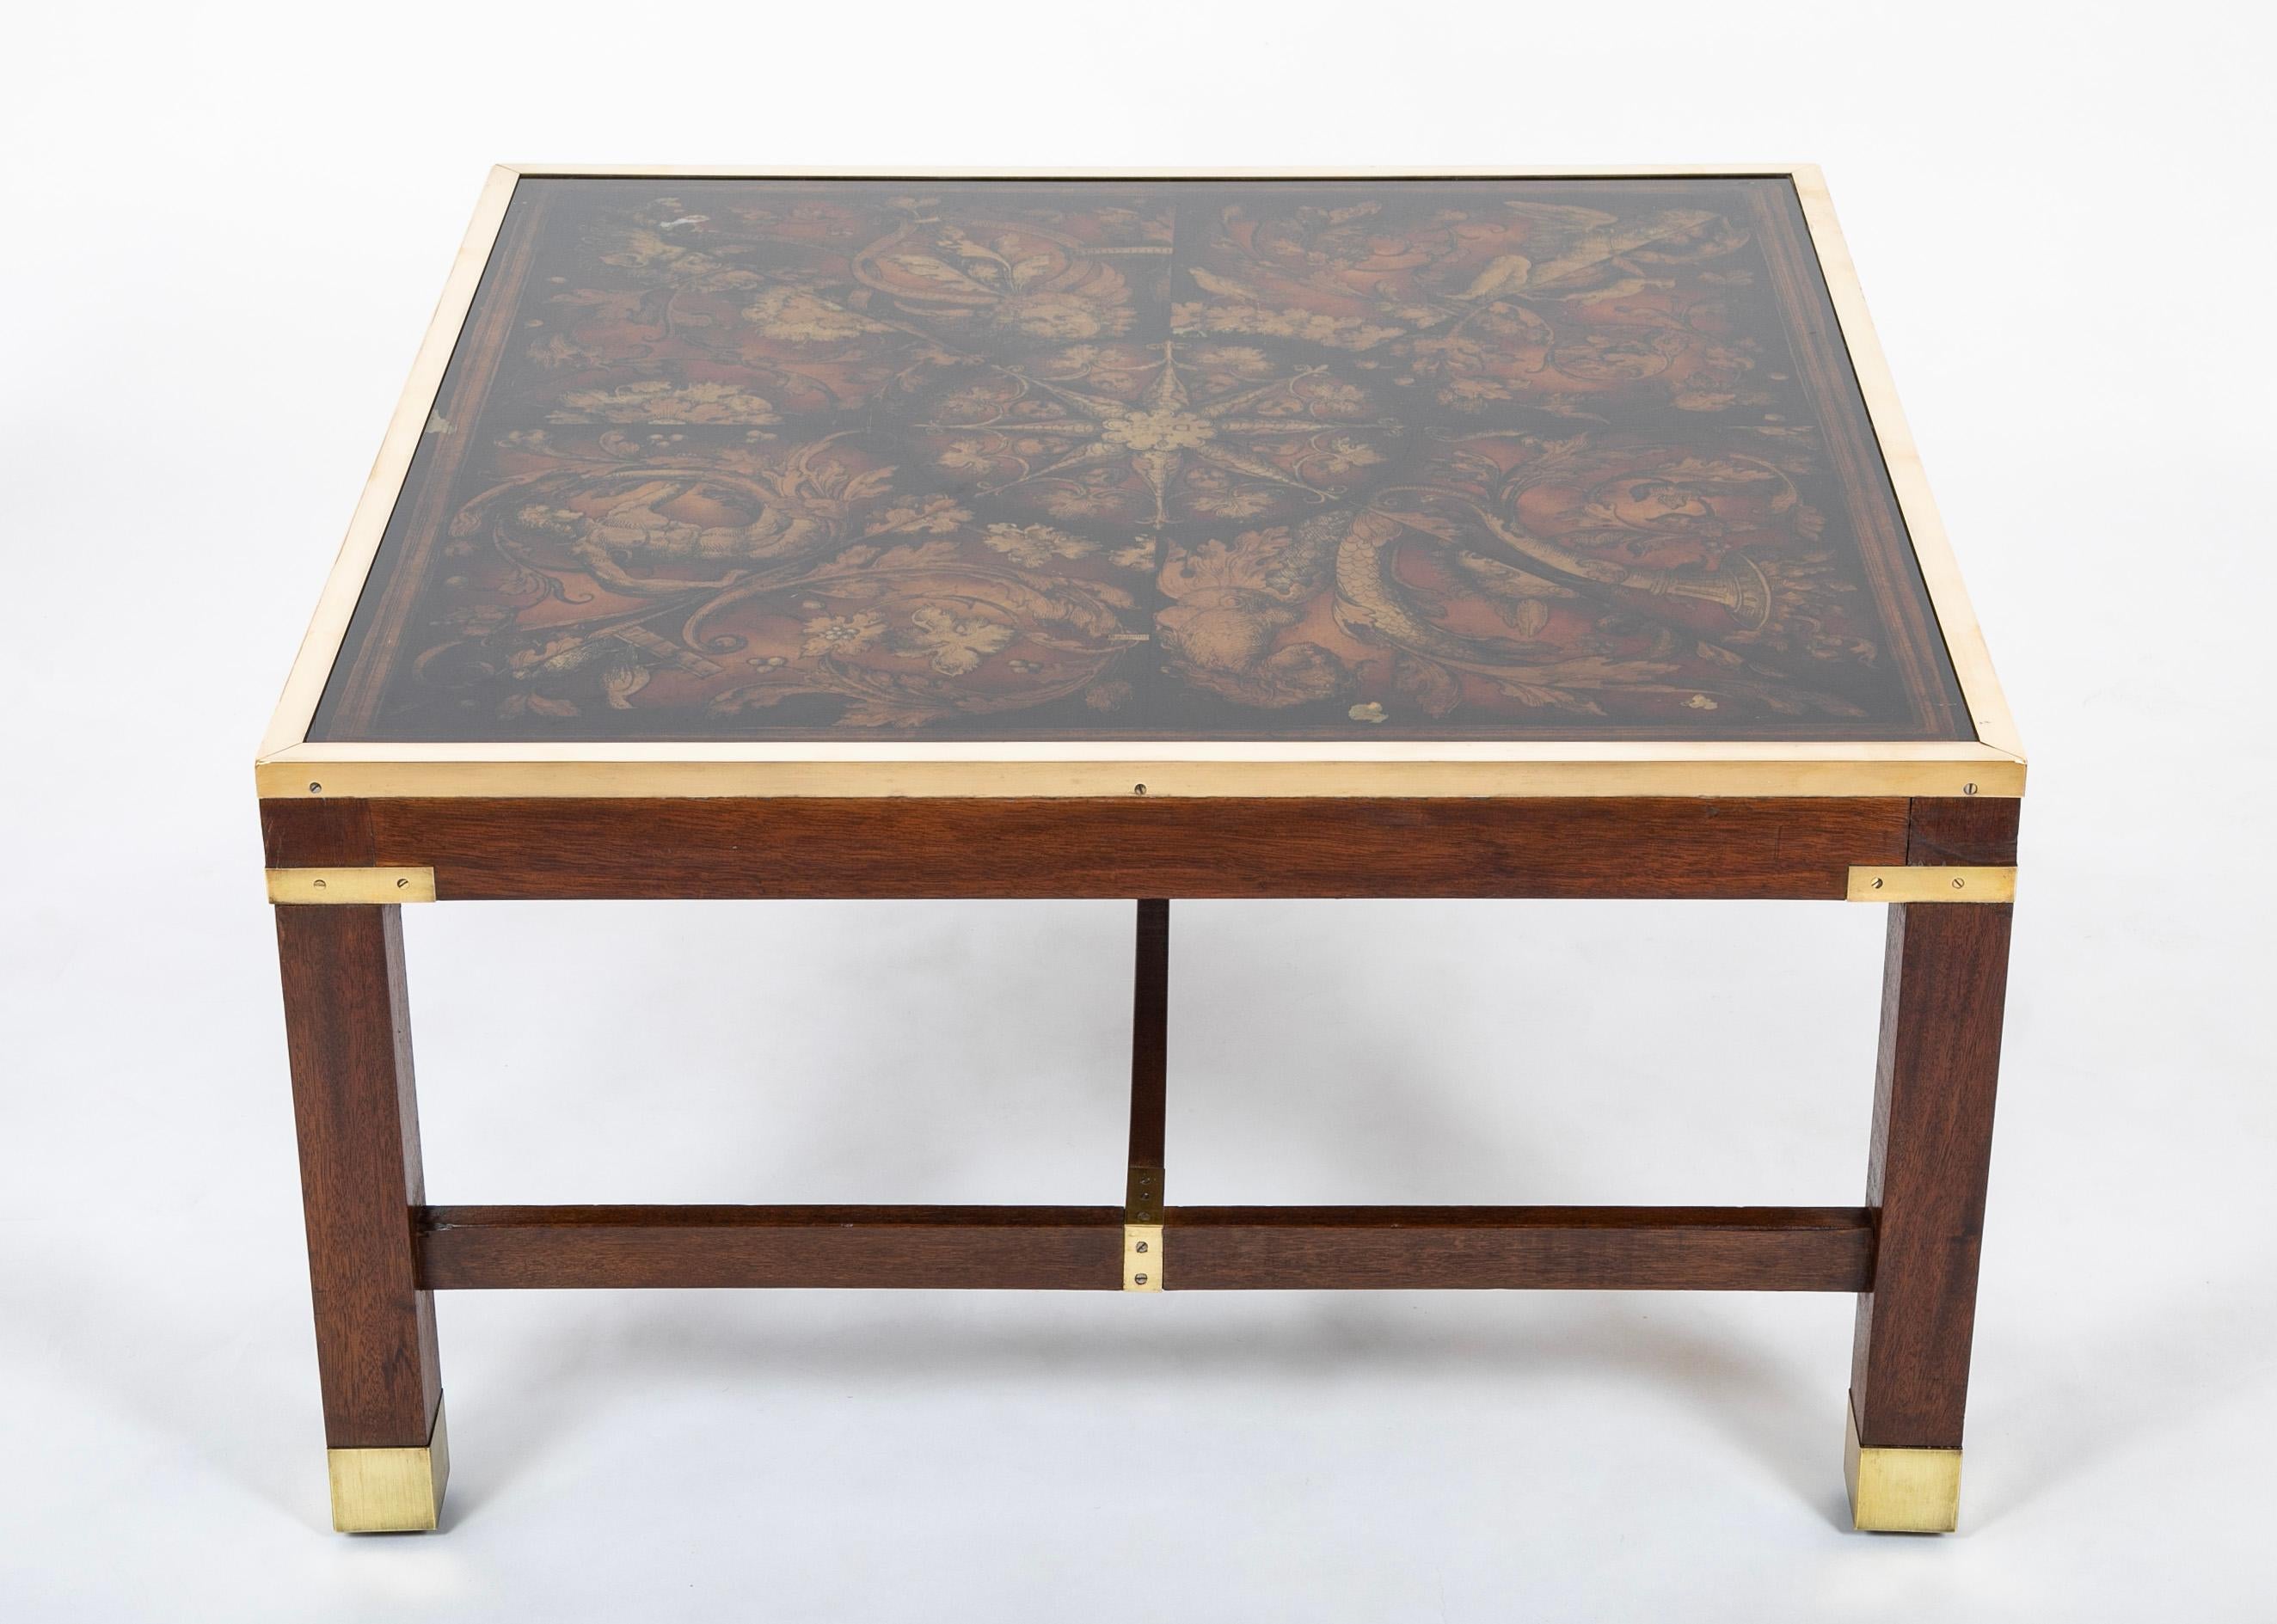 Fornasetti Style Coffee Table with Reverse Glass Top on Walnut and Brass Base In Good Condition For Sale In Stamford, CT